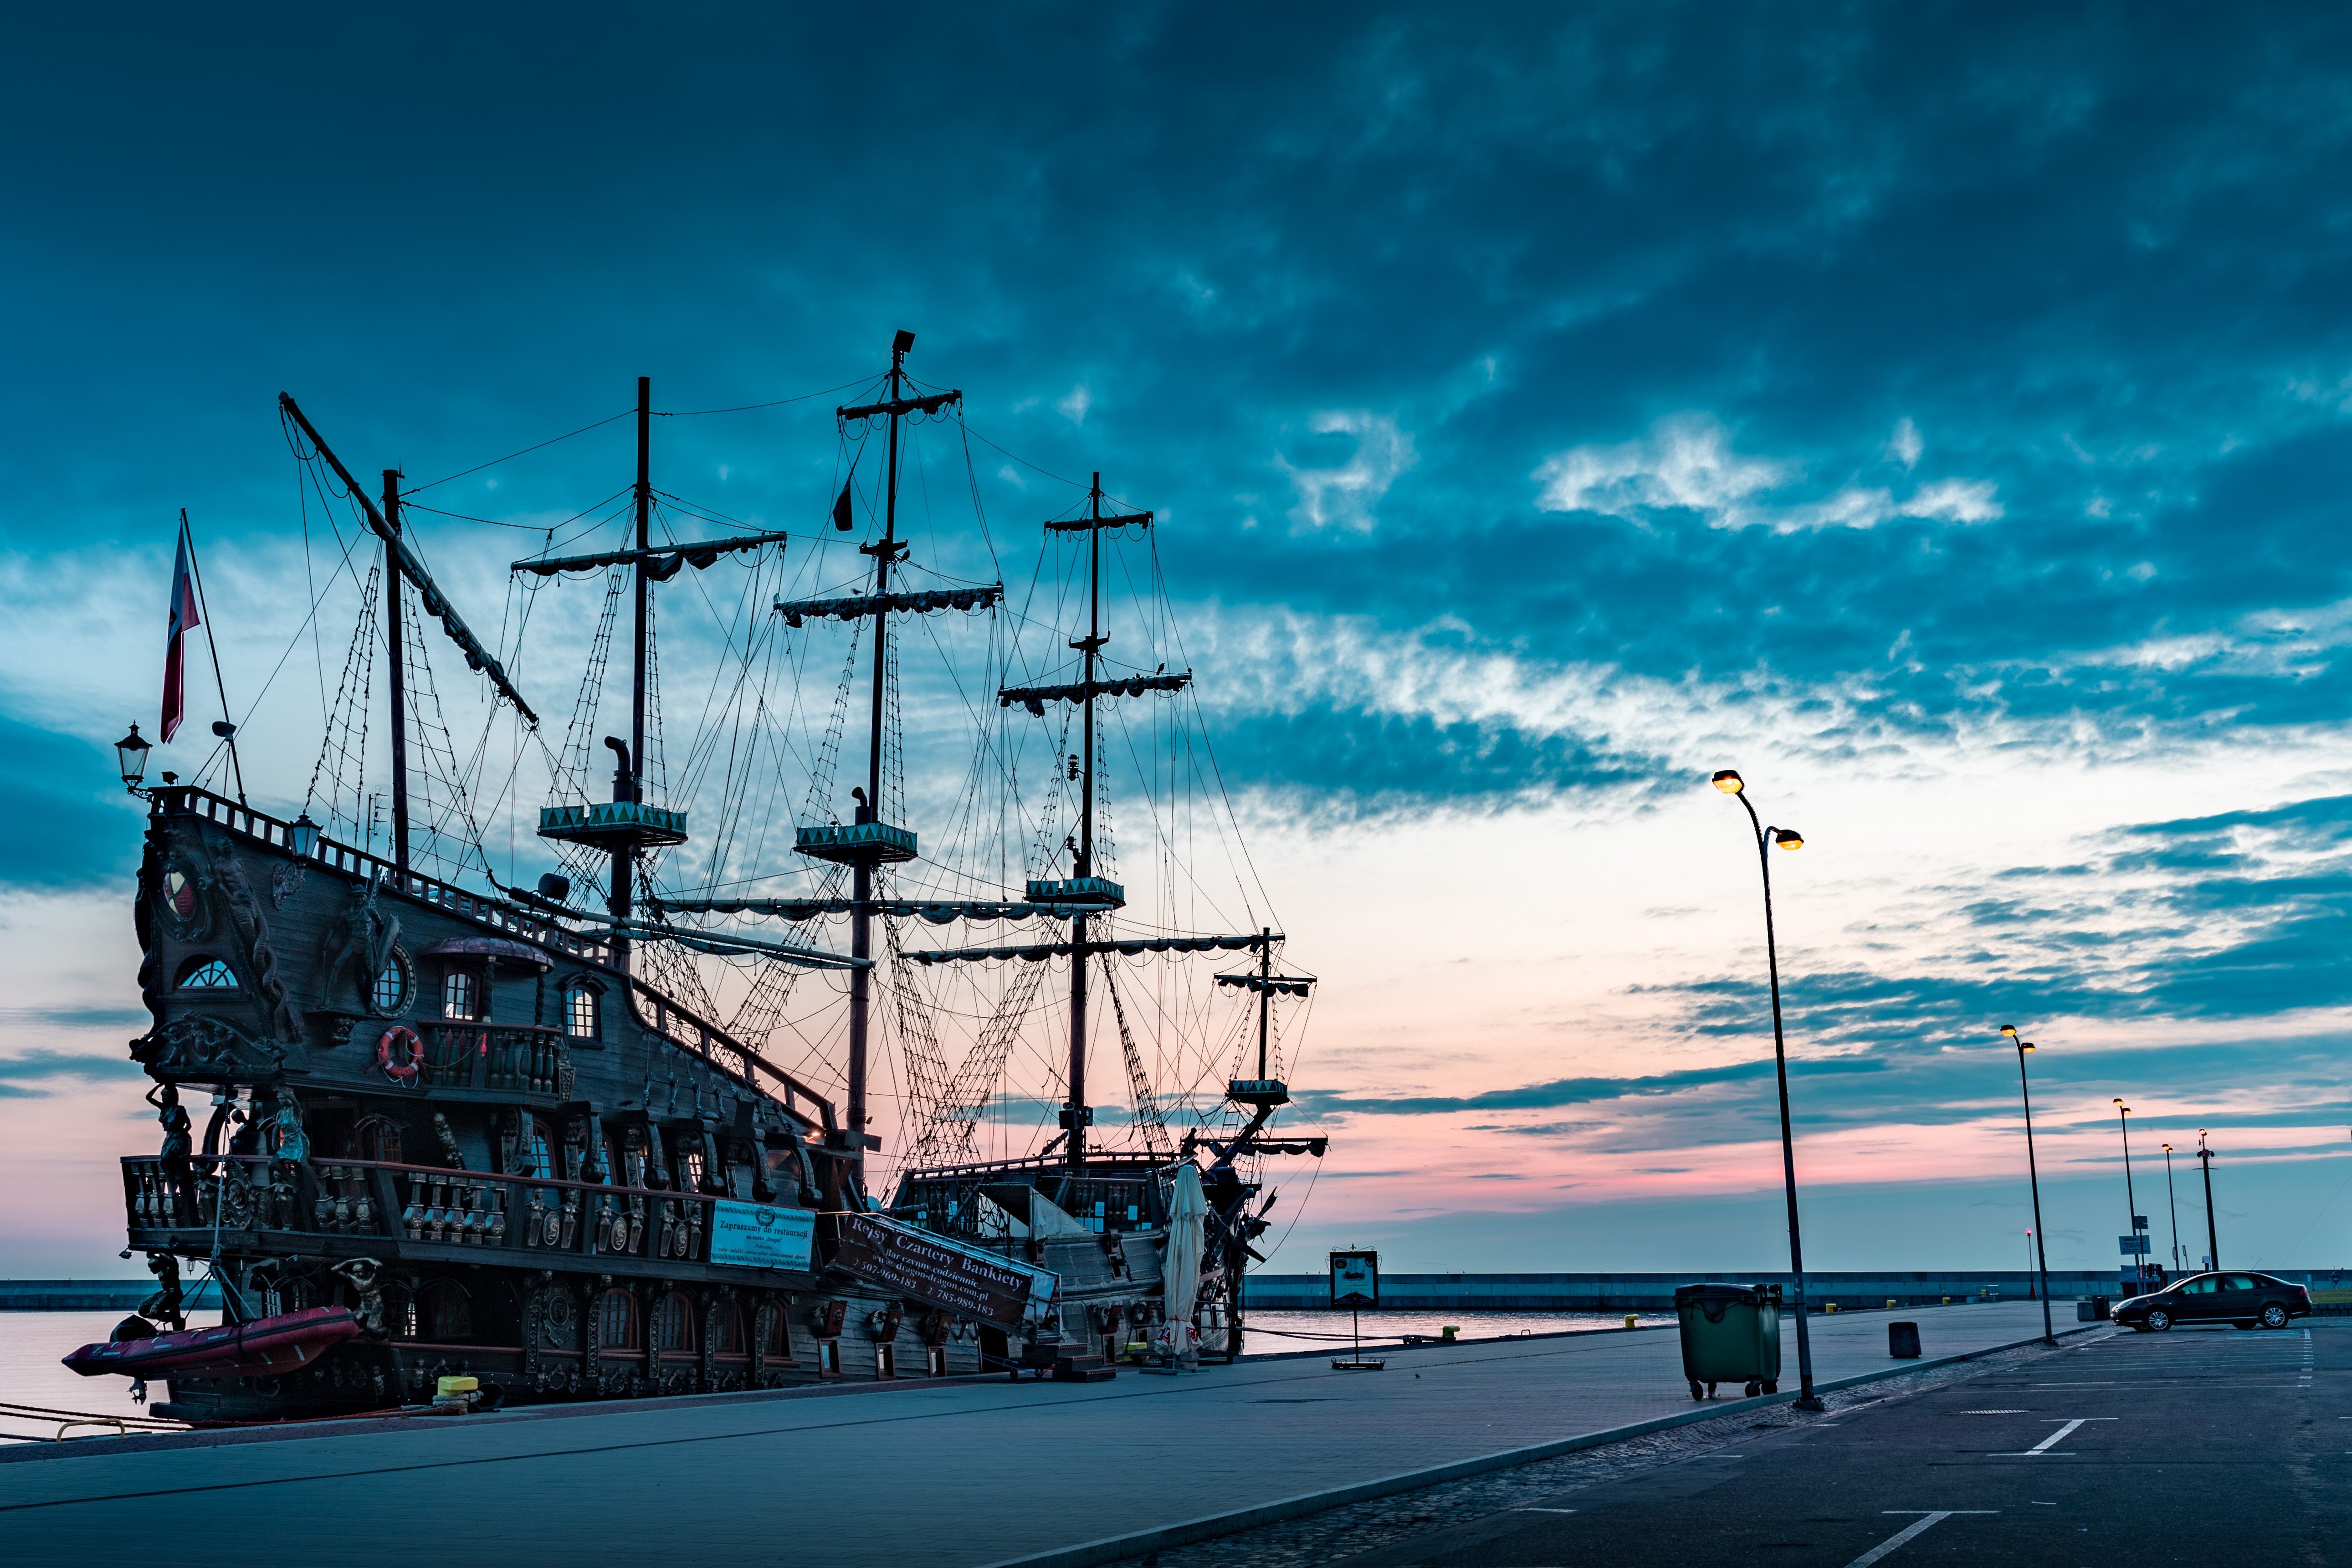 A galleon ship anchored at the dock | Source: Unsplash.com